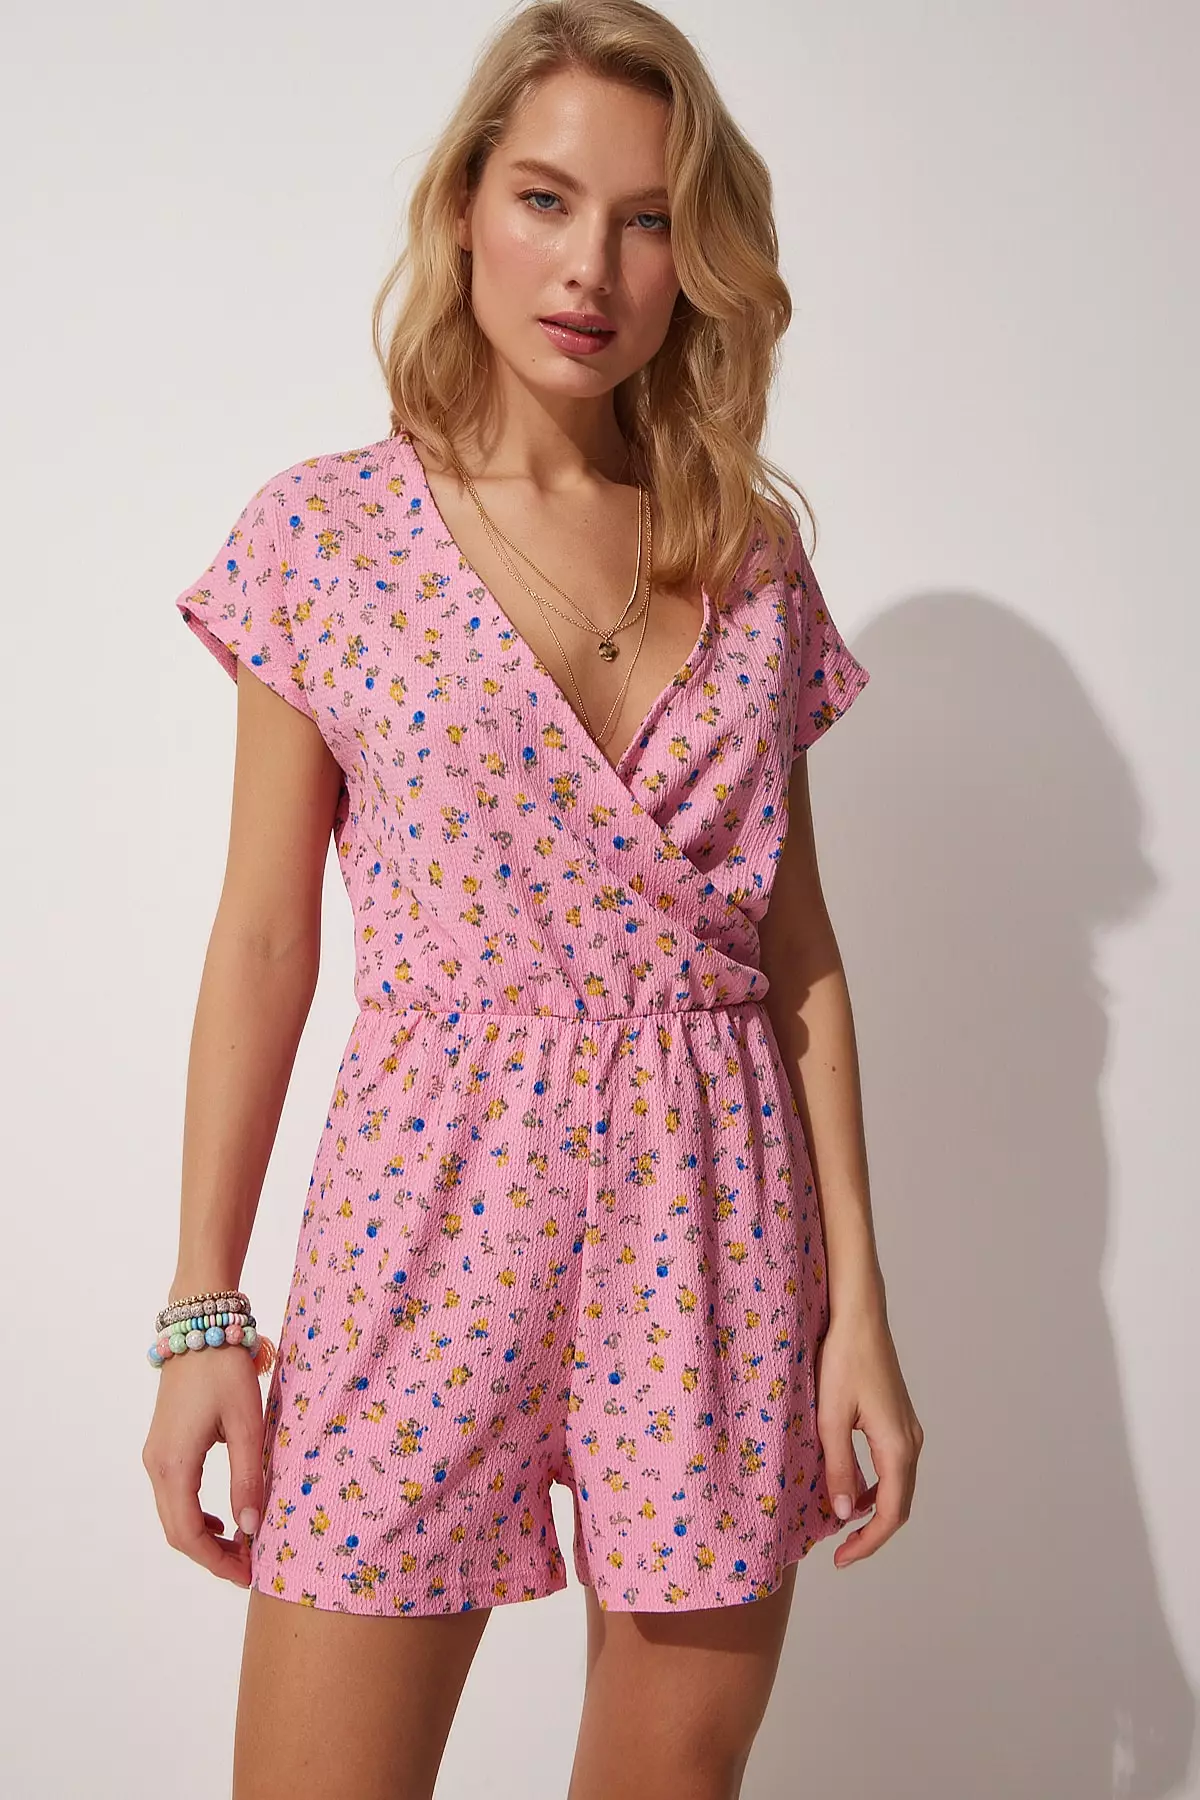 Playsuits & Jumpsuits For Women - Sale Up to 90% Off